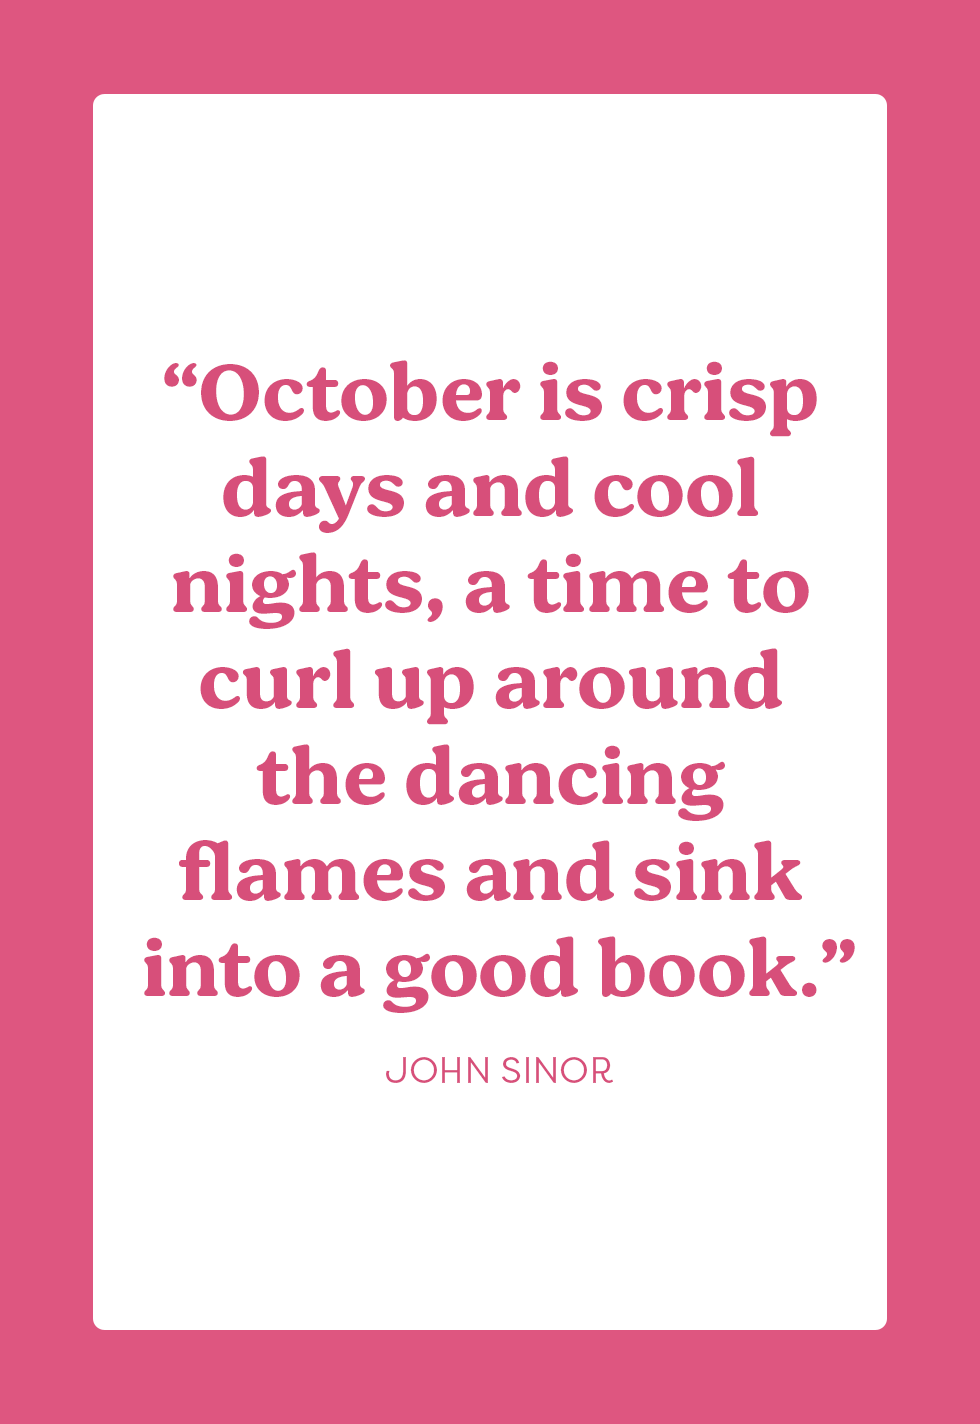 25 Best October Quotes - Famous Inspirational Sayings about October